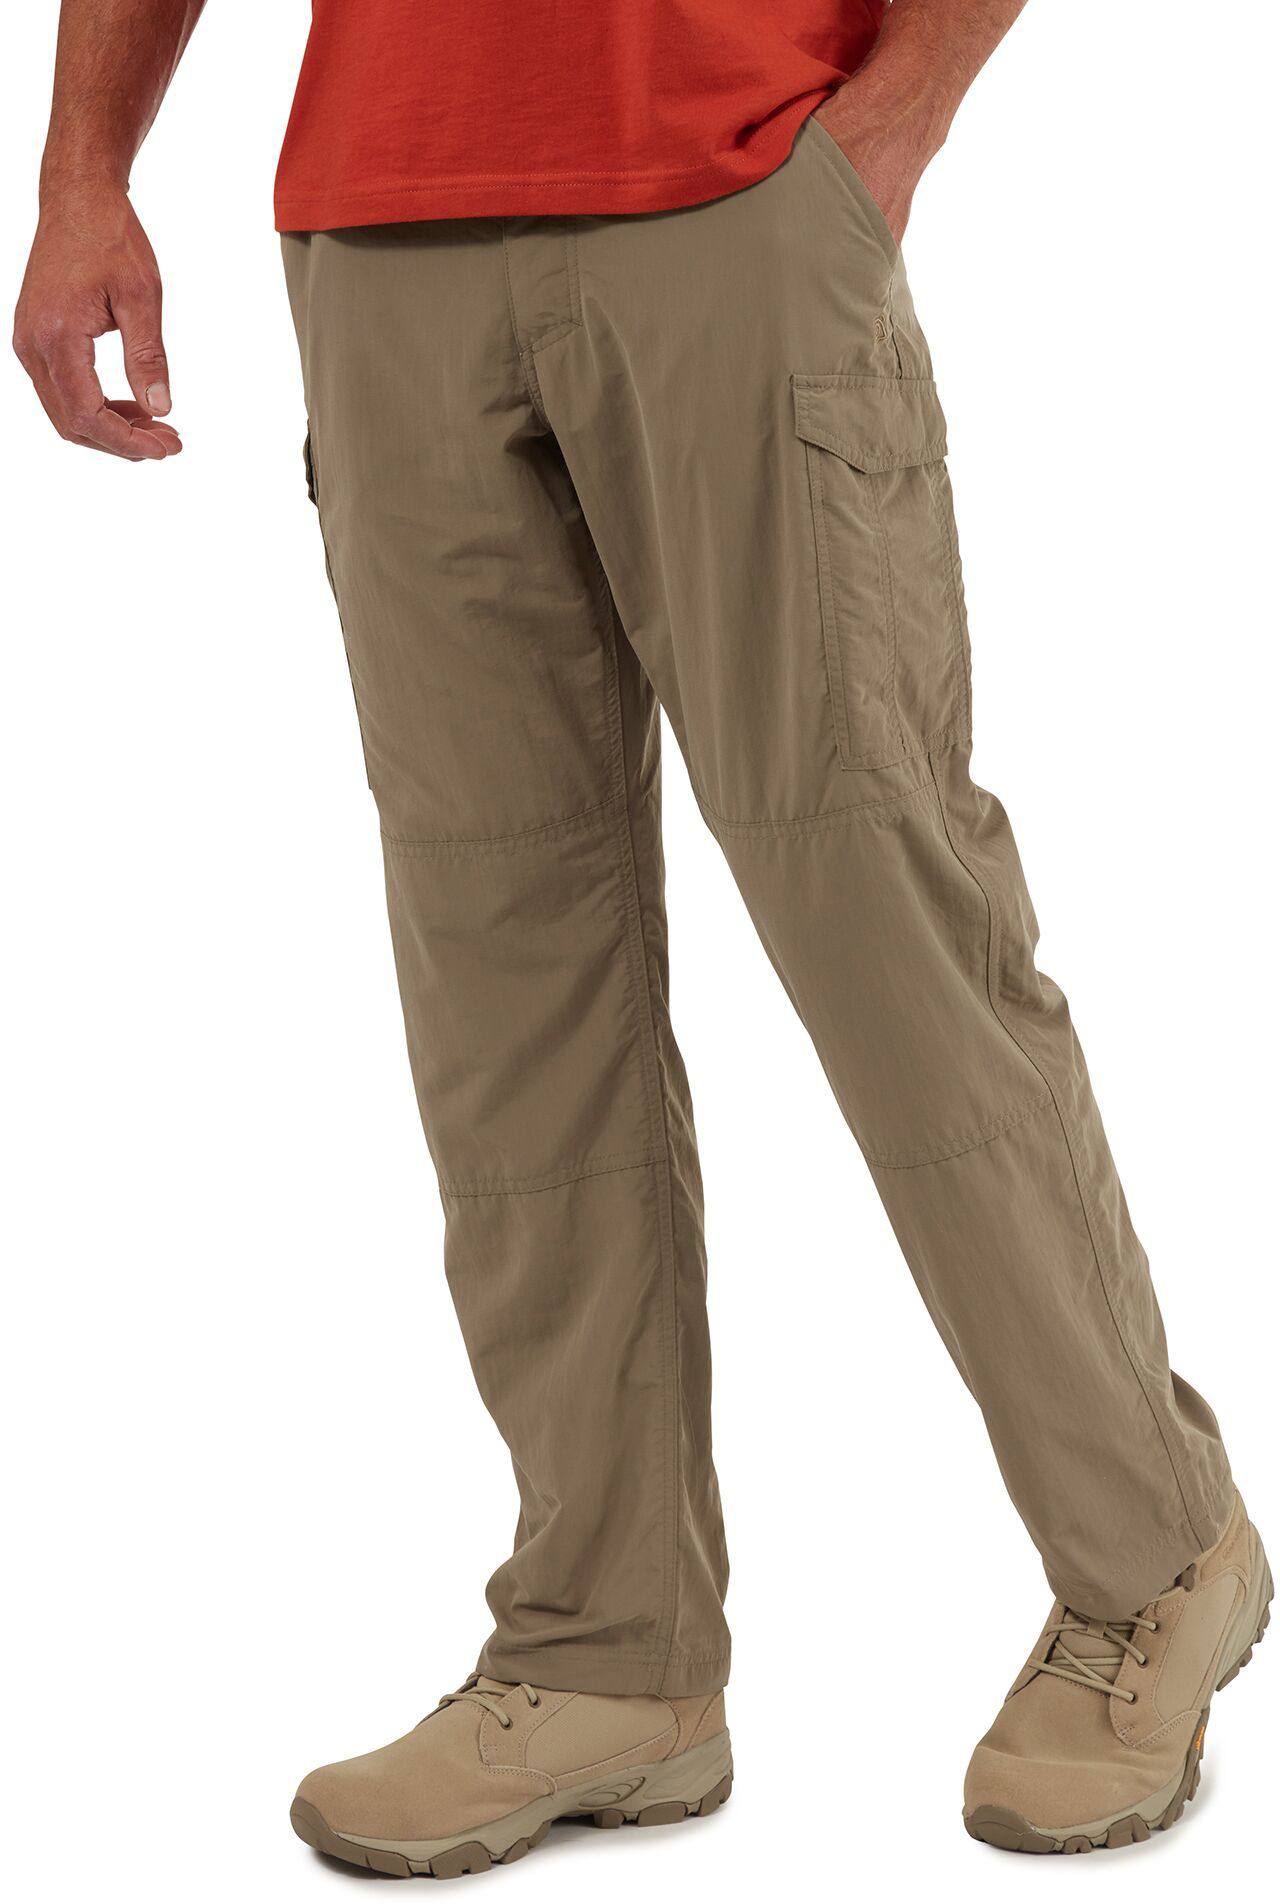 Craghoppers Nosilife Cargo Long Trousers Beige 36